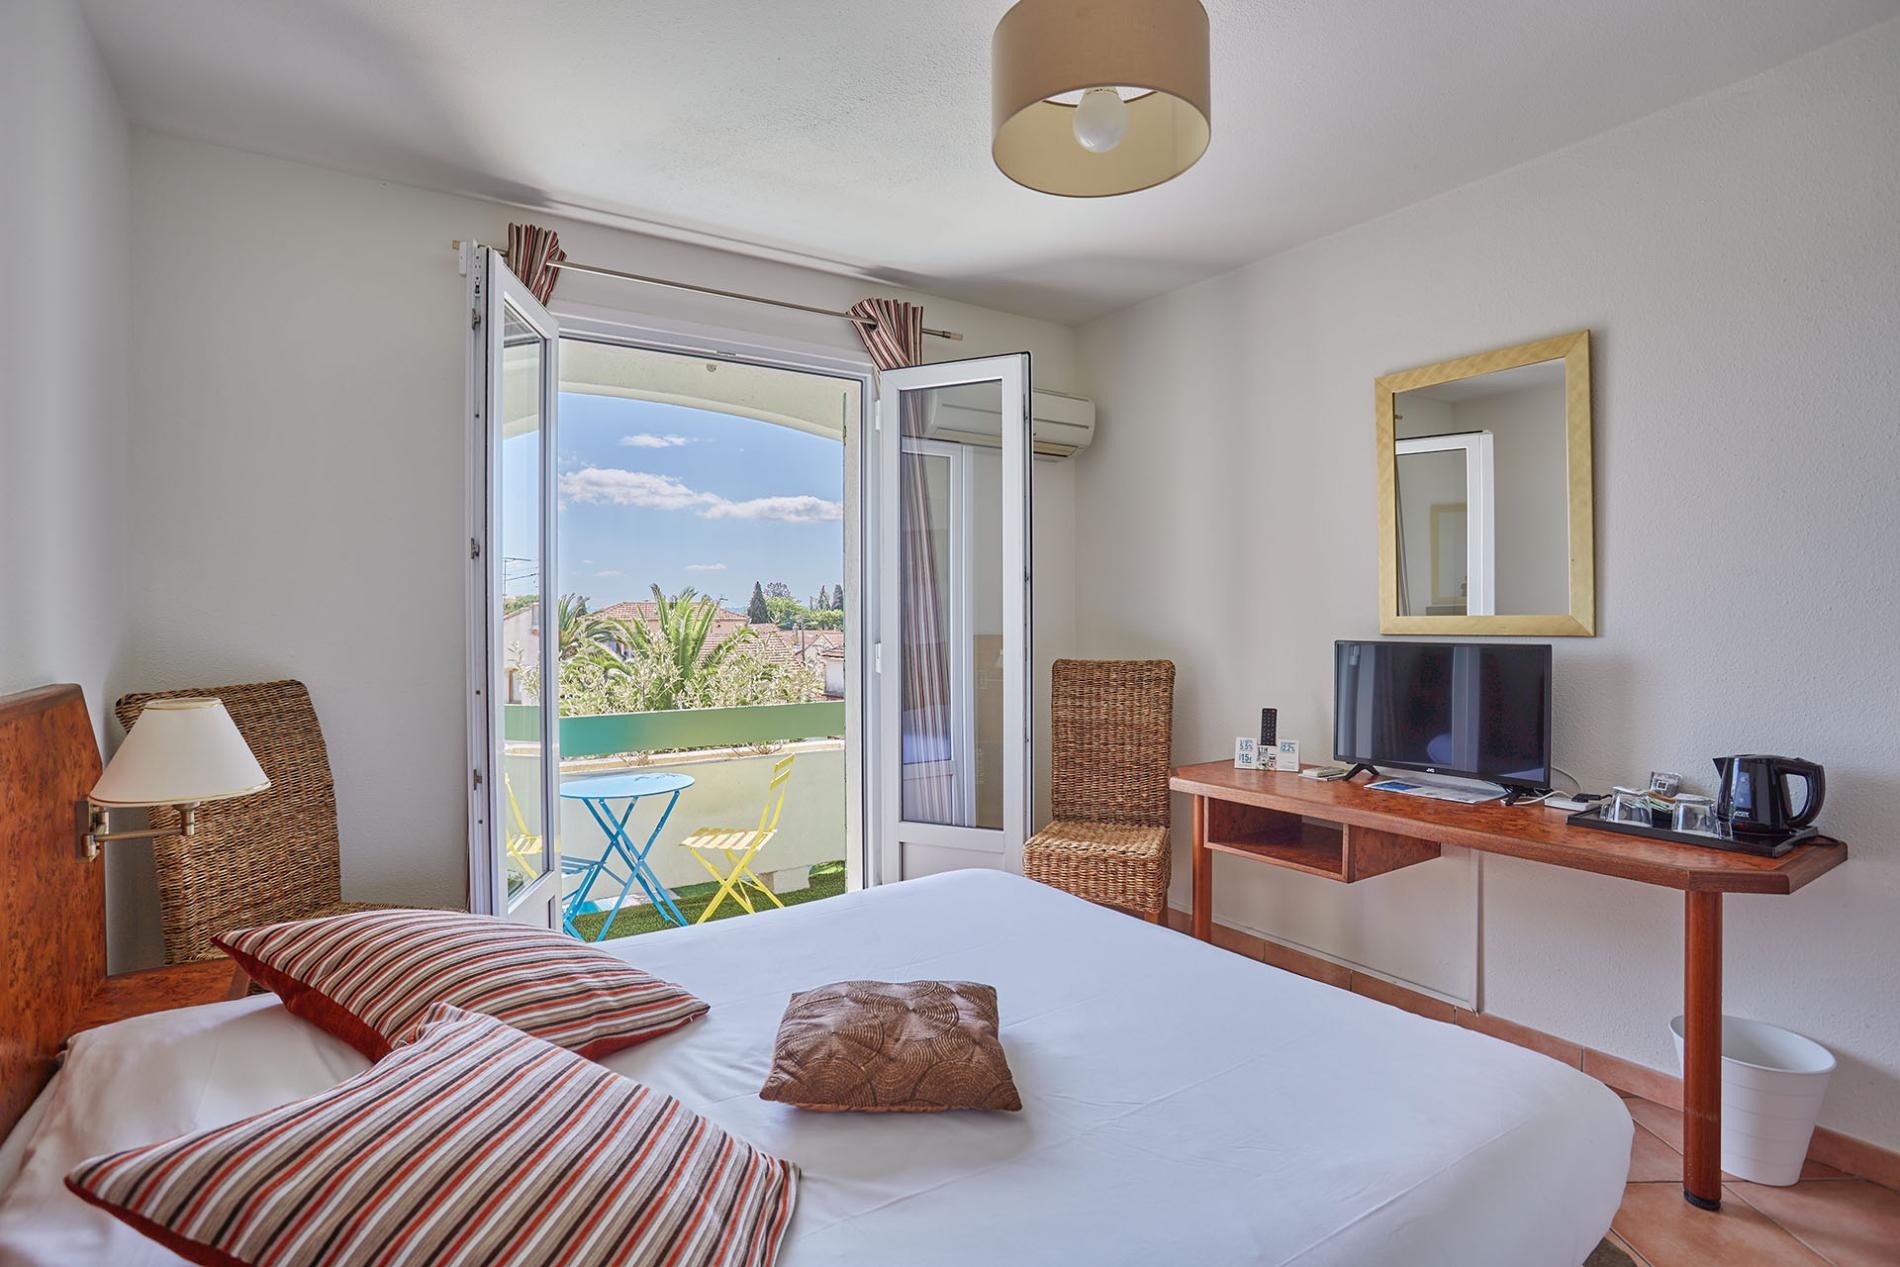 Junior family suite with balcony and pool view